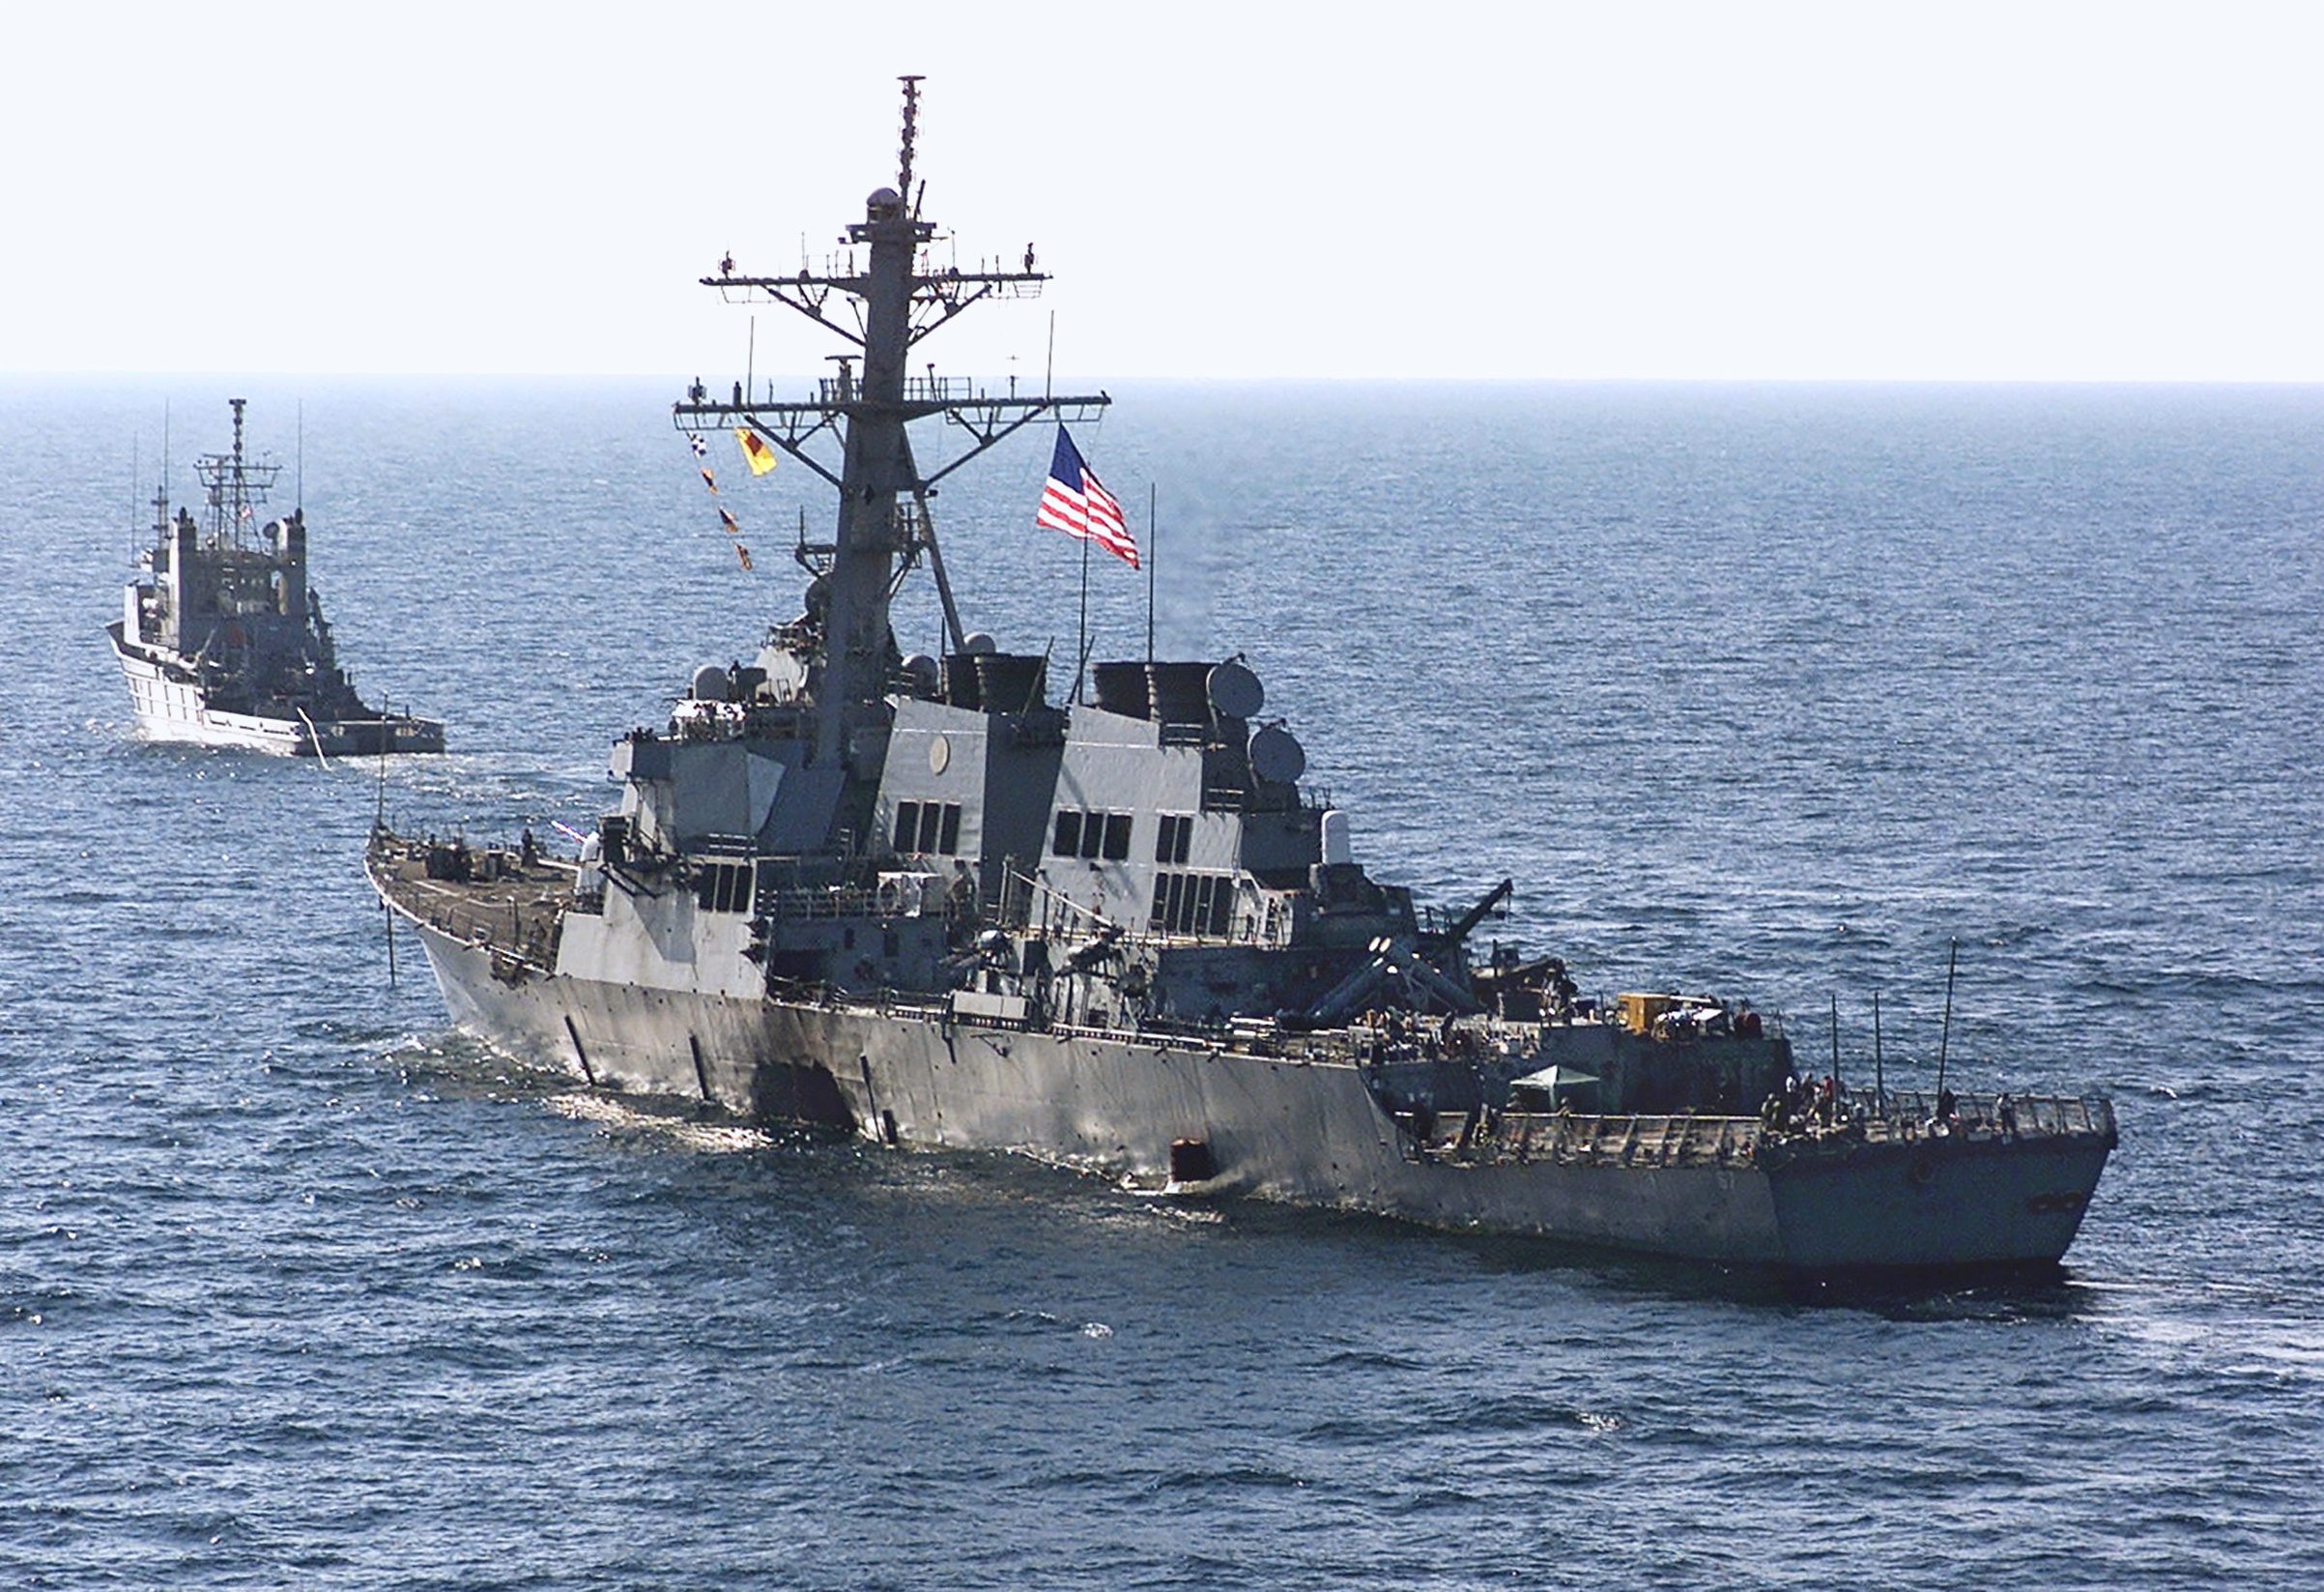 The U.S.S. Cole was attacked in Yemen on Oct. 12, 2000 (Sgt. Don L. Maes—U.S. Navy News Photo/MCT/Getty Images)